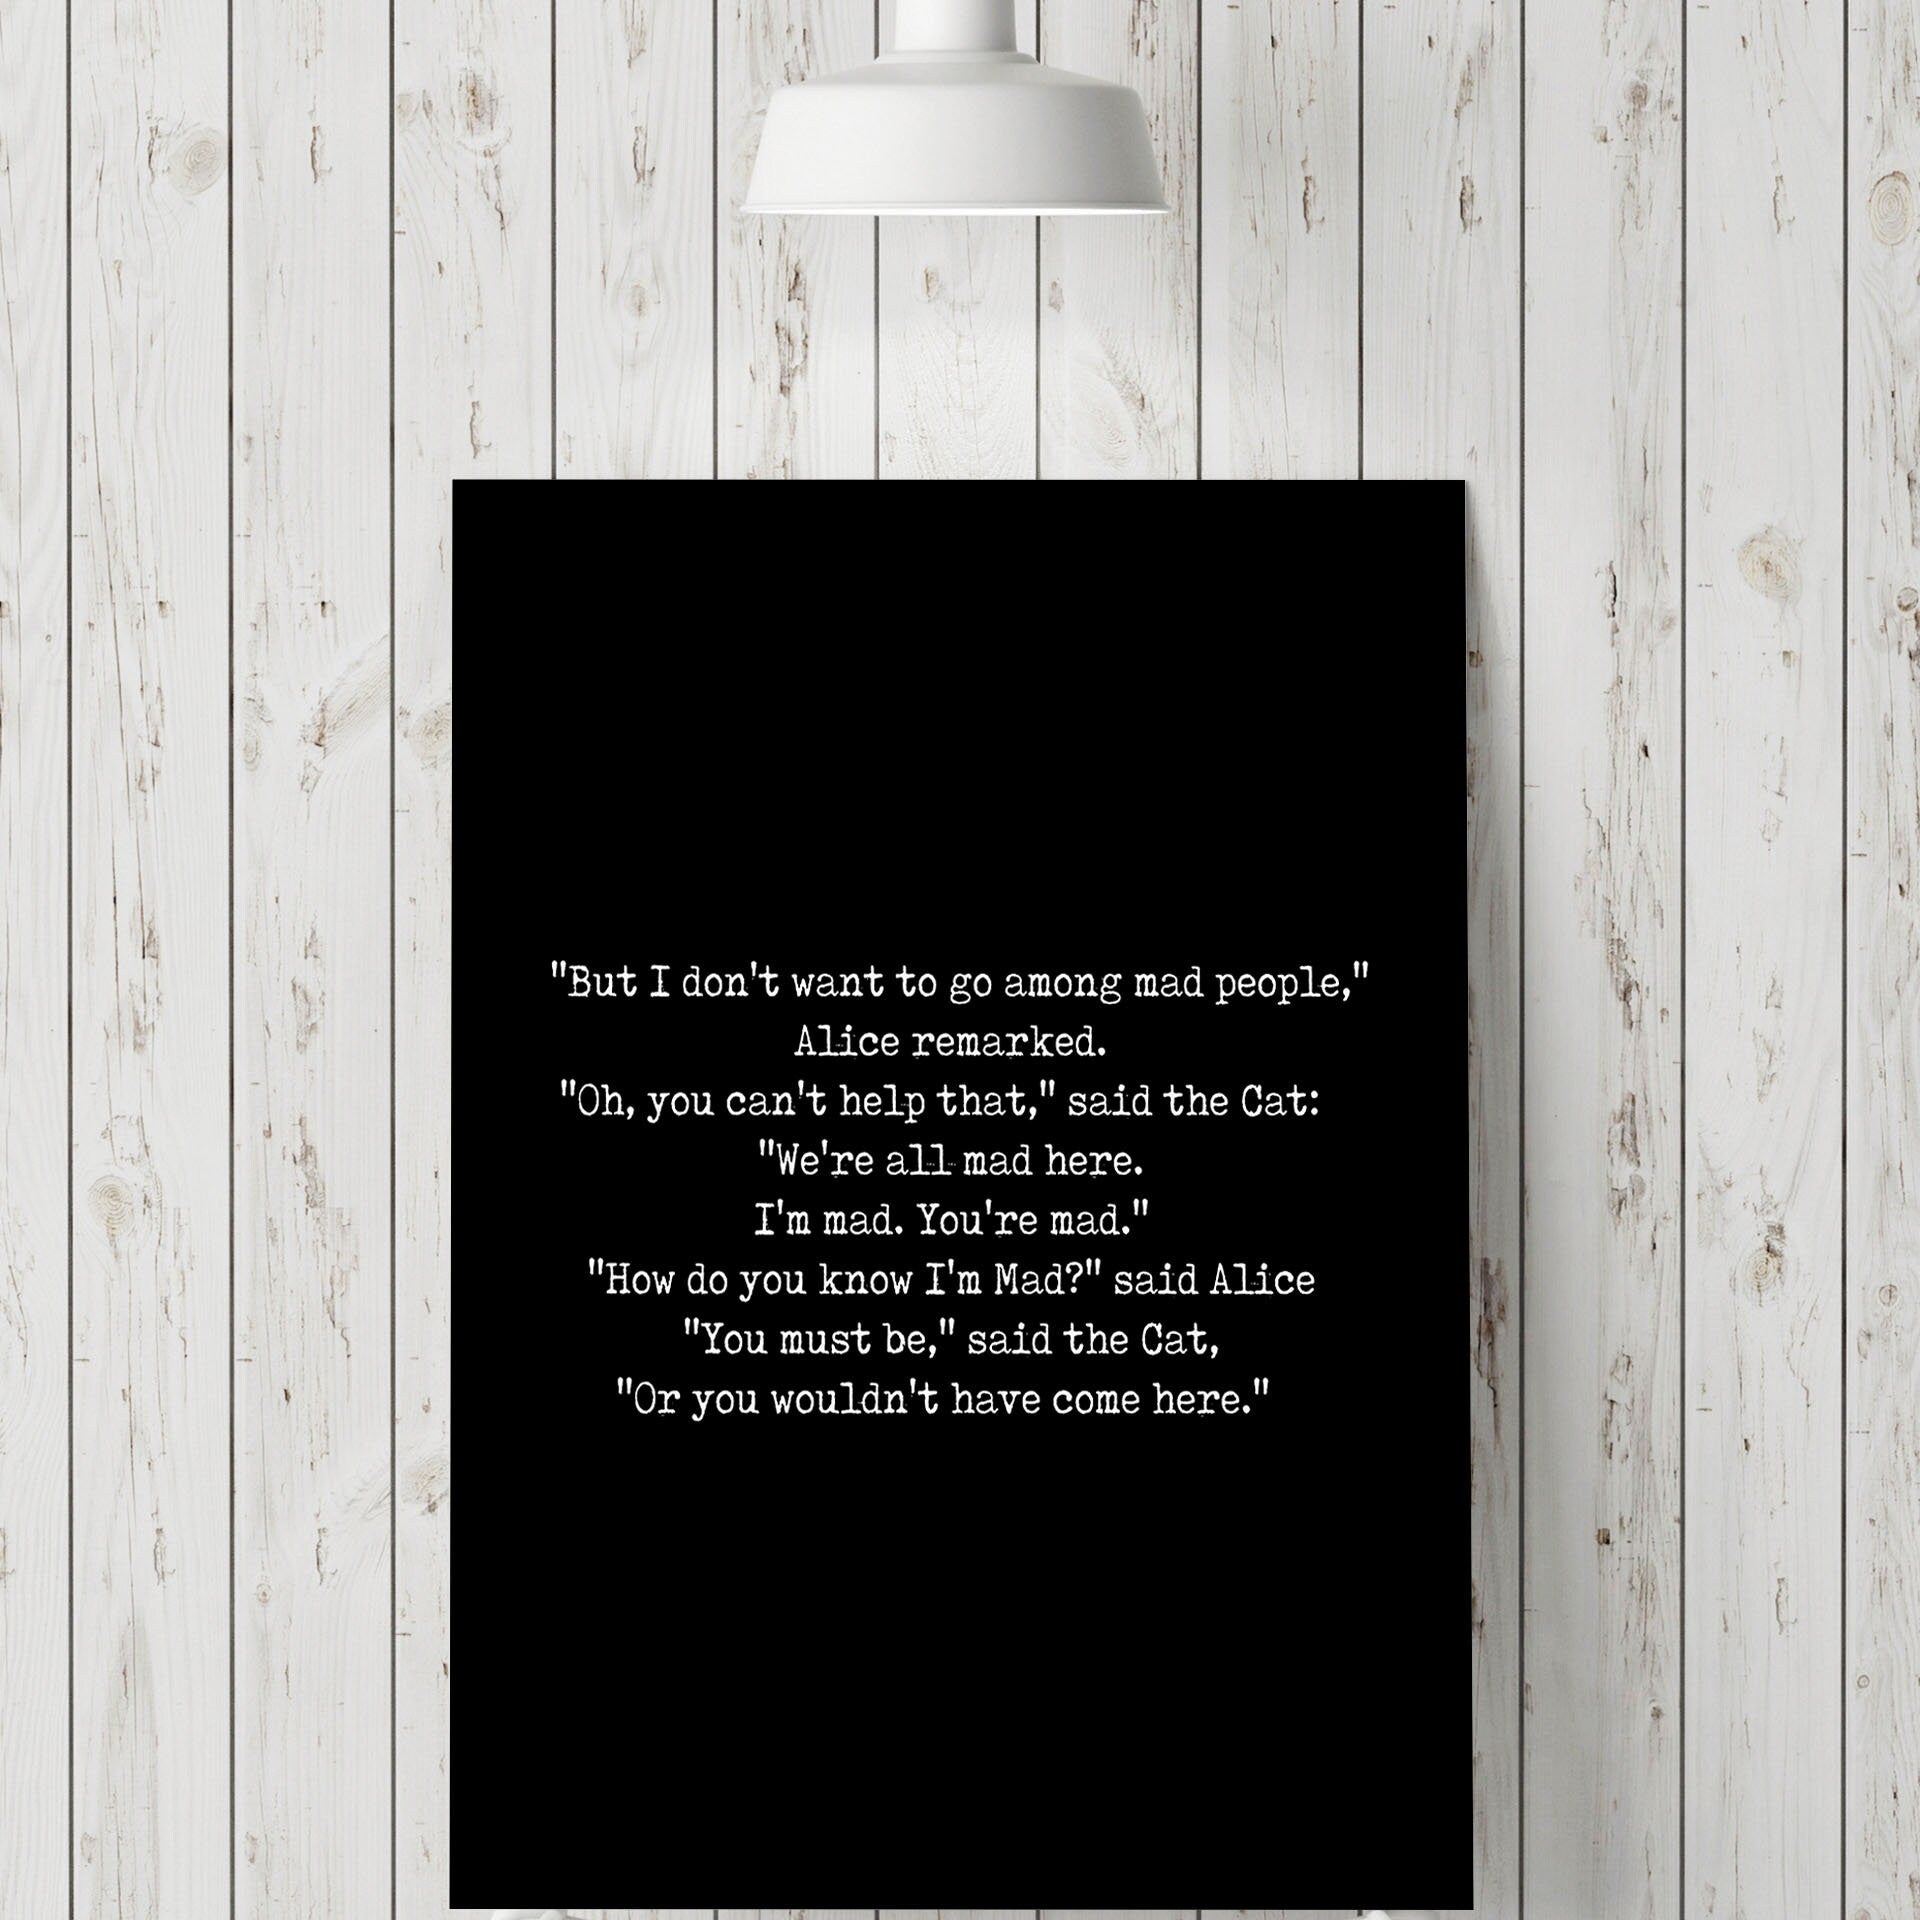 We're All Mad Here Wall Art Print, Alice in Wonderland Lewis Carroll Quote Print for Black & White Office Wall Art